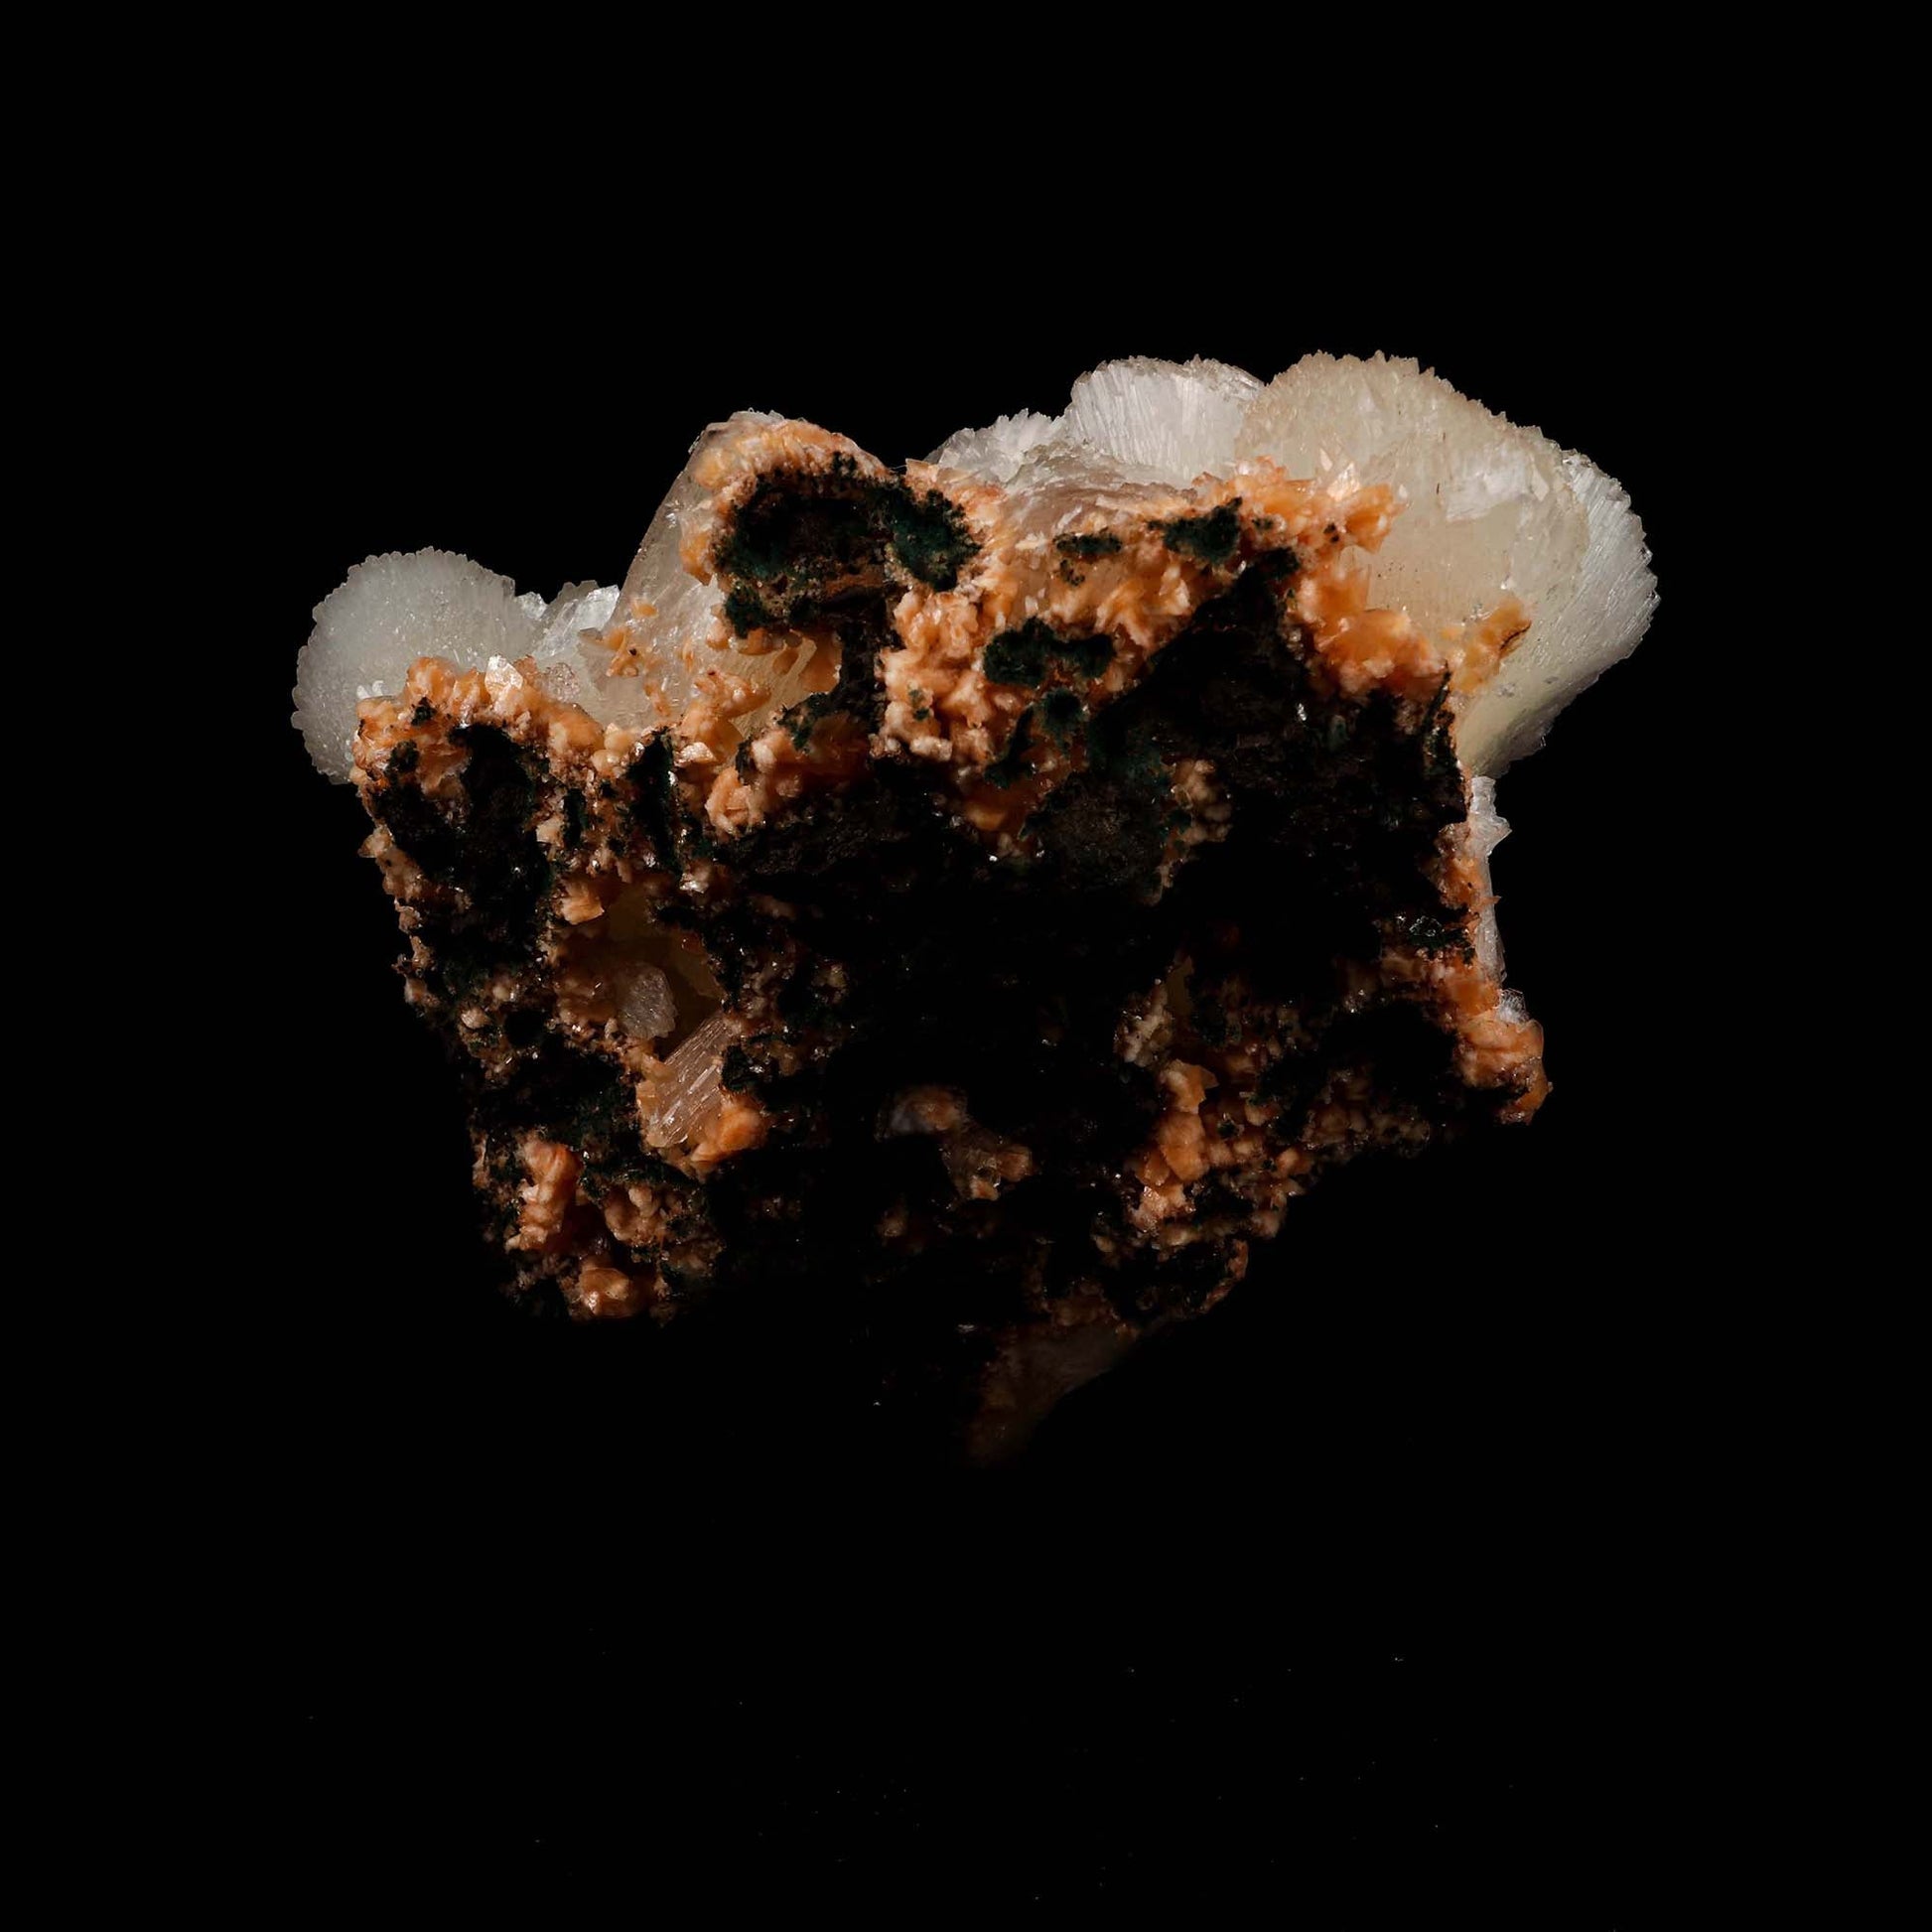 Stilbite Lusterous Cluster Natural Mineral Specimen # B 5185  https://www.superbminerals.us/products/stilbite-lusterous-cluster-natural-mineral-specimen-b-5185  Features: Featuring many excellent quality bladed groups of Stilbite in a soft white hue, resting over pearly stalactitic formations of peach colored Heulandite, this piece is a stunning example of the material. The sculpture is really flashy and three-dimensional, and I particularly like how the Stilbites 